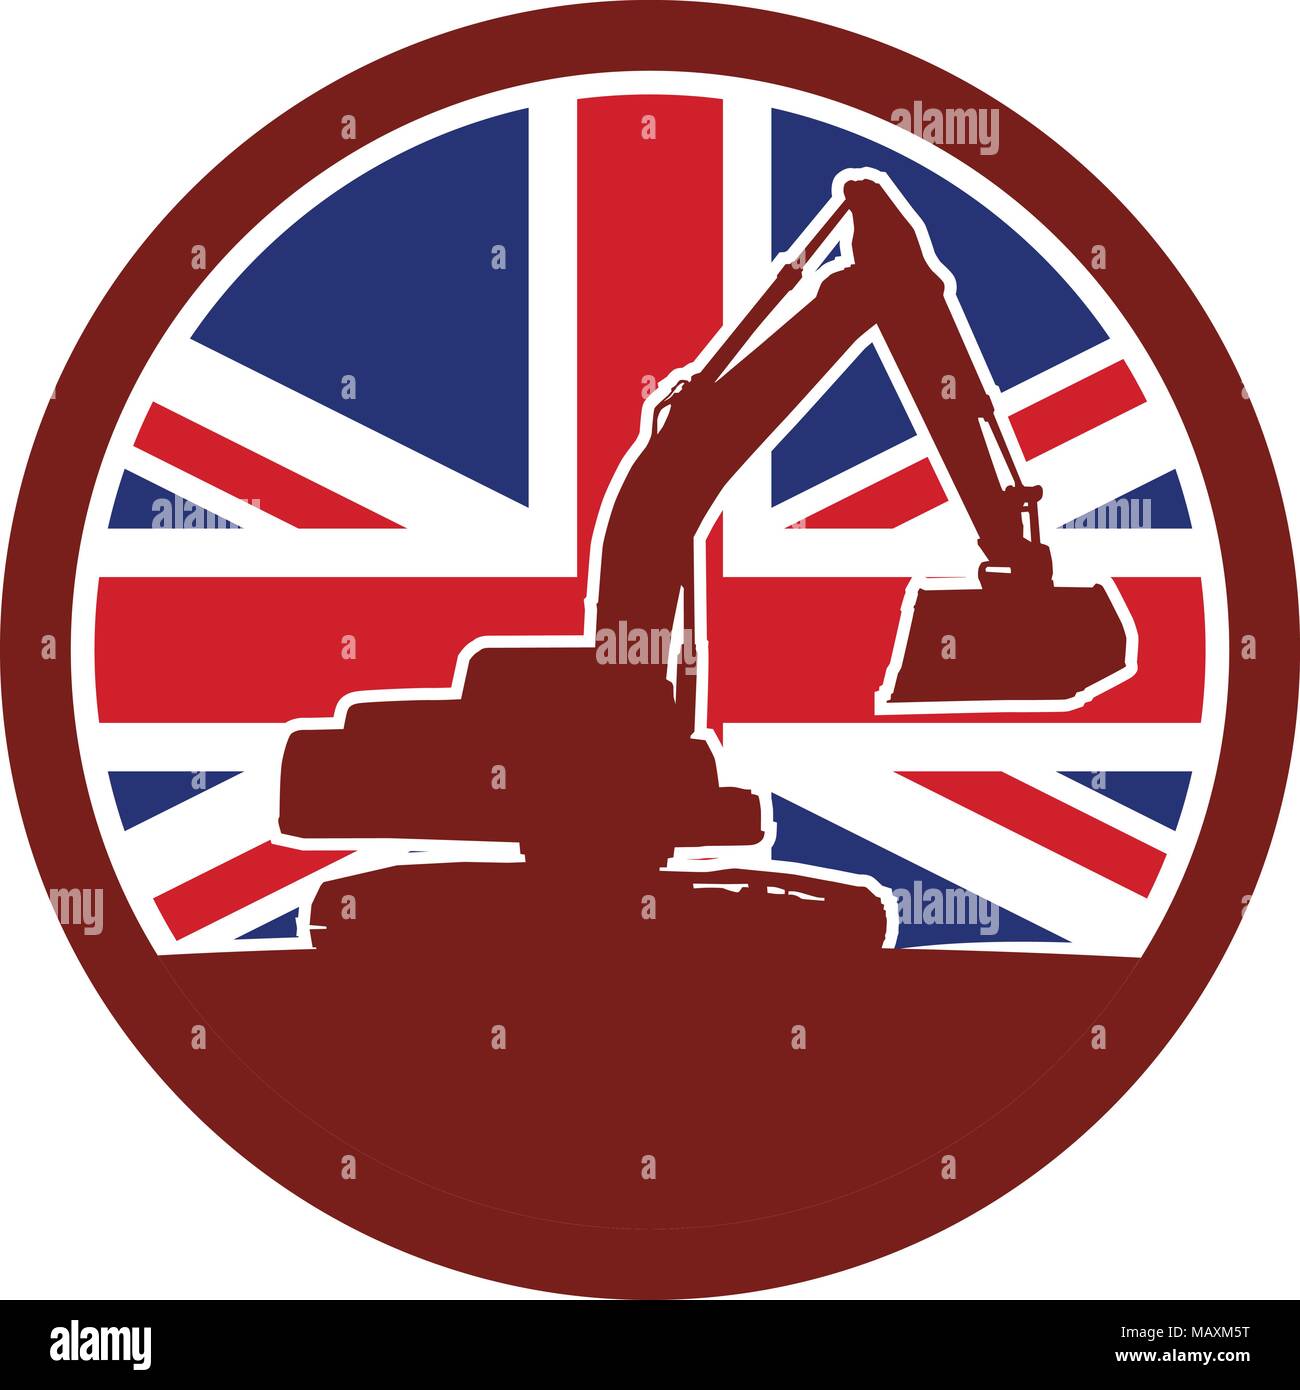 Icon retro style illustration of silhouette of a British mechanical digger or excavator viewed from side with United Kingdom UK, Great Britain Union J Stock Vector